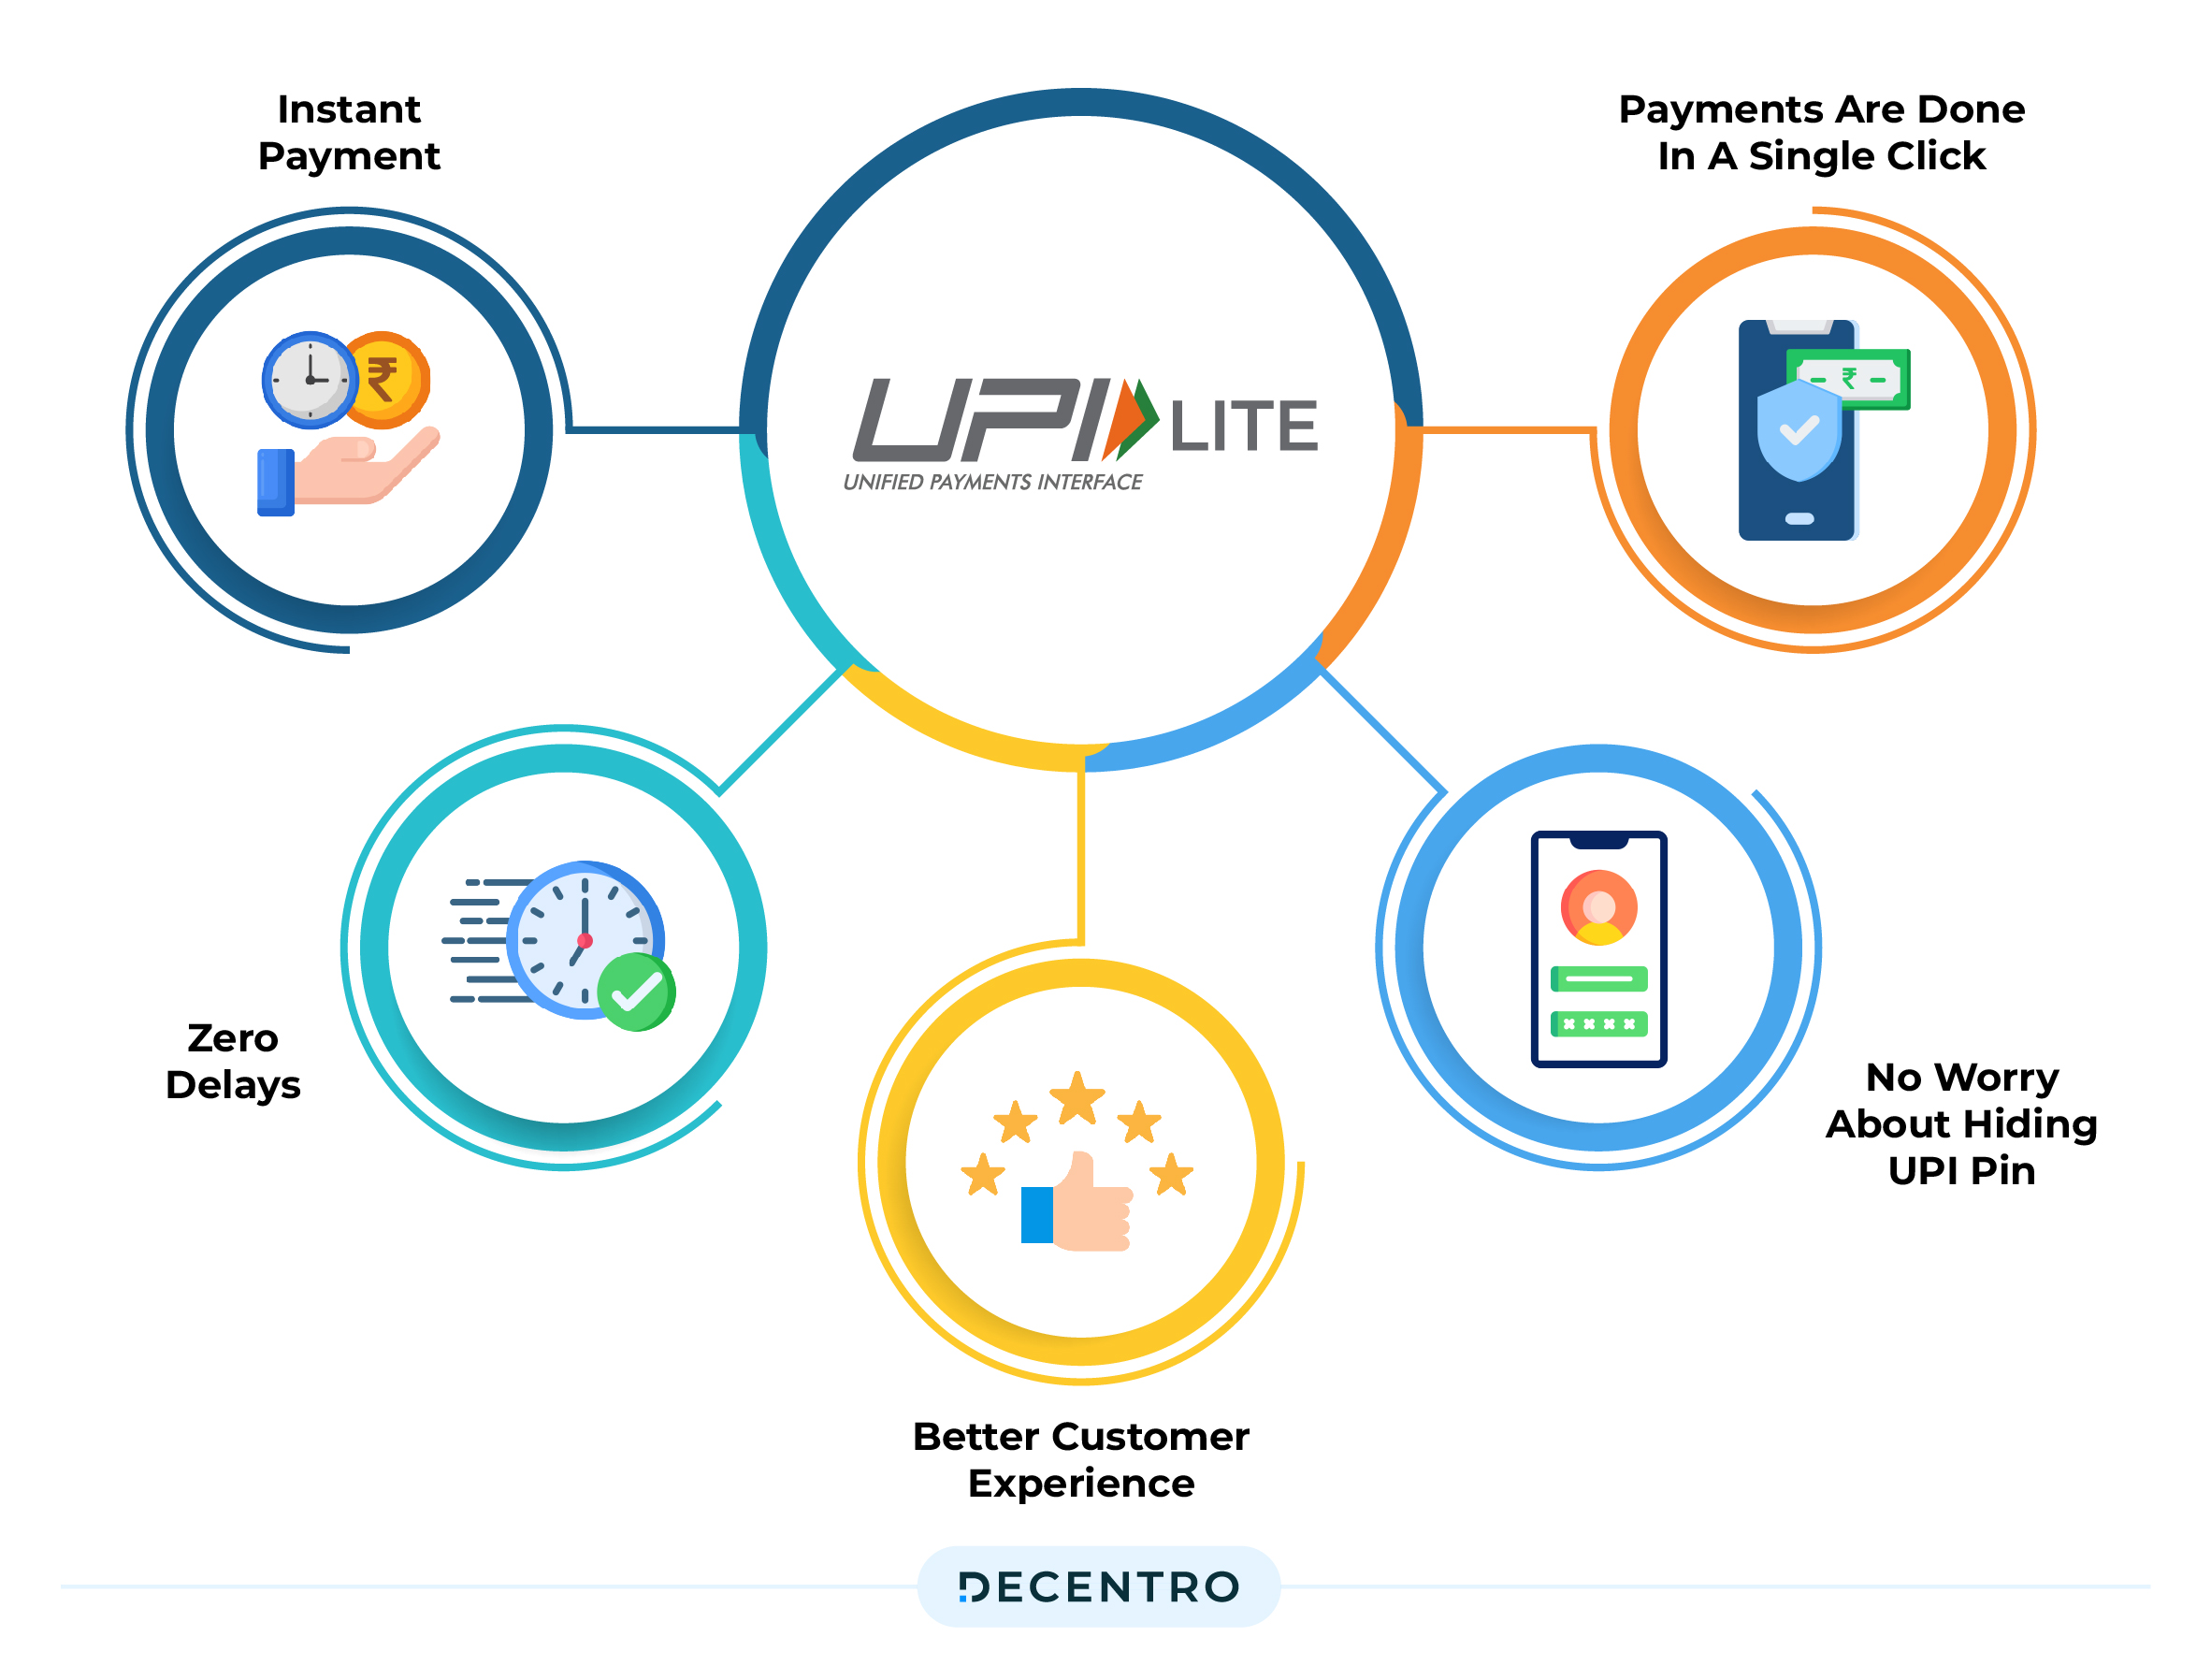 Features of UPI Lite